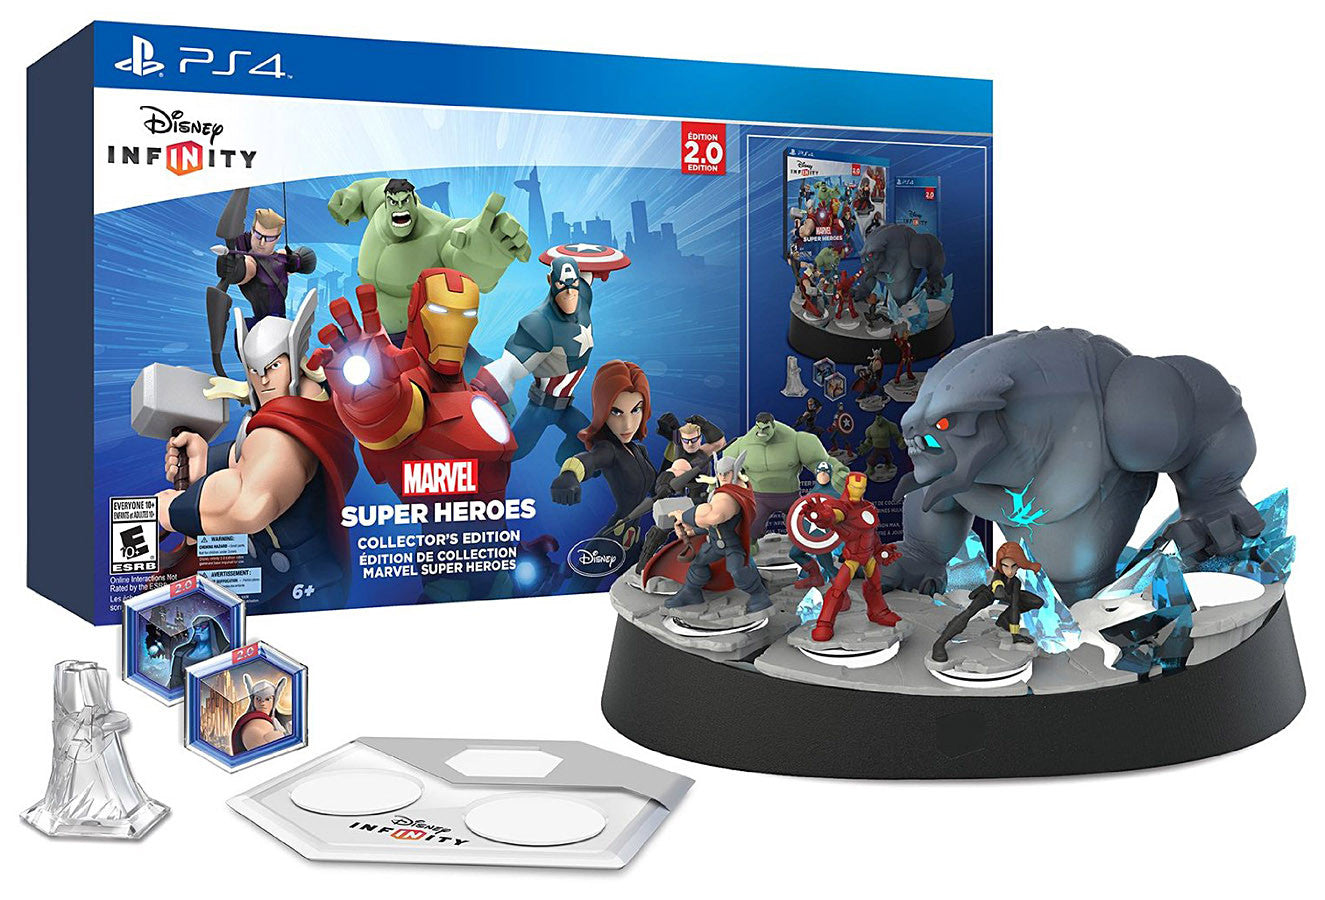 Disney Infinity 2.0 Edition - Marvel Super Heroes Collector s (European) (Toy) (PLAYSTATION4) on PLAYSTATION4 Game